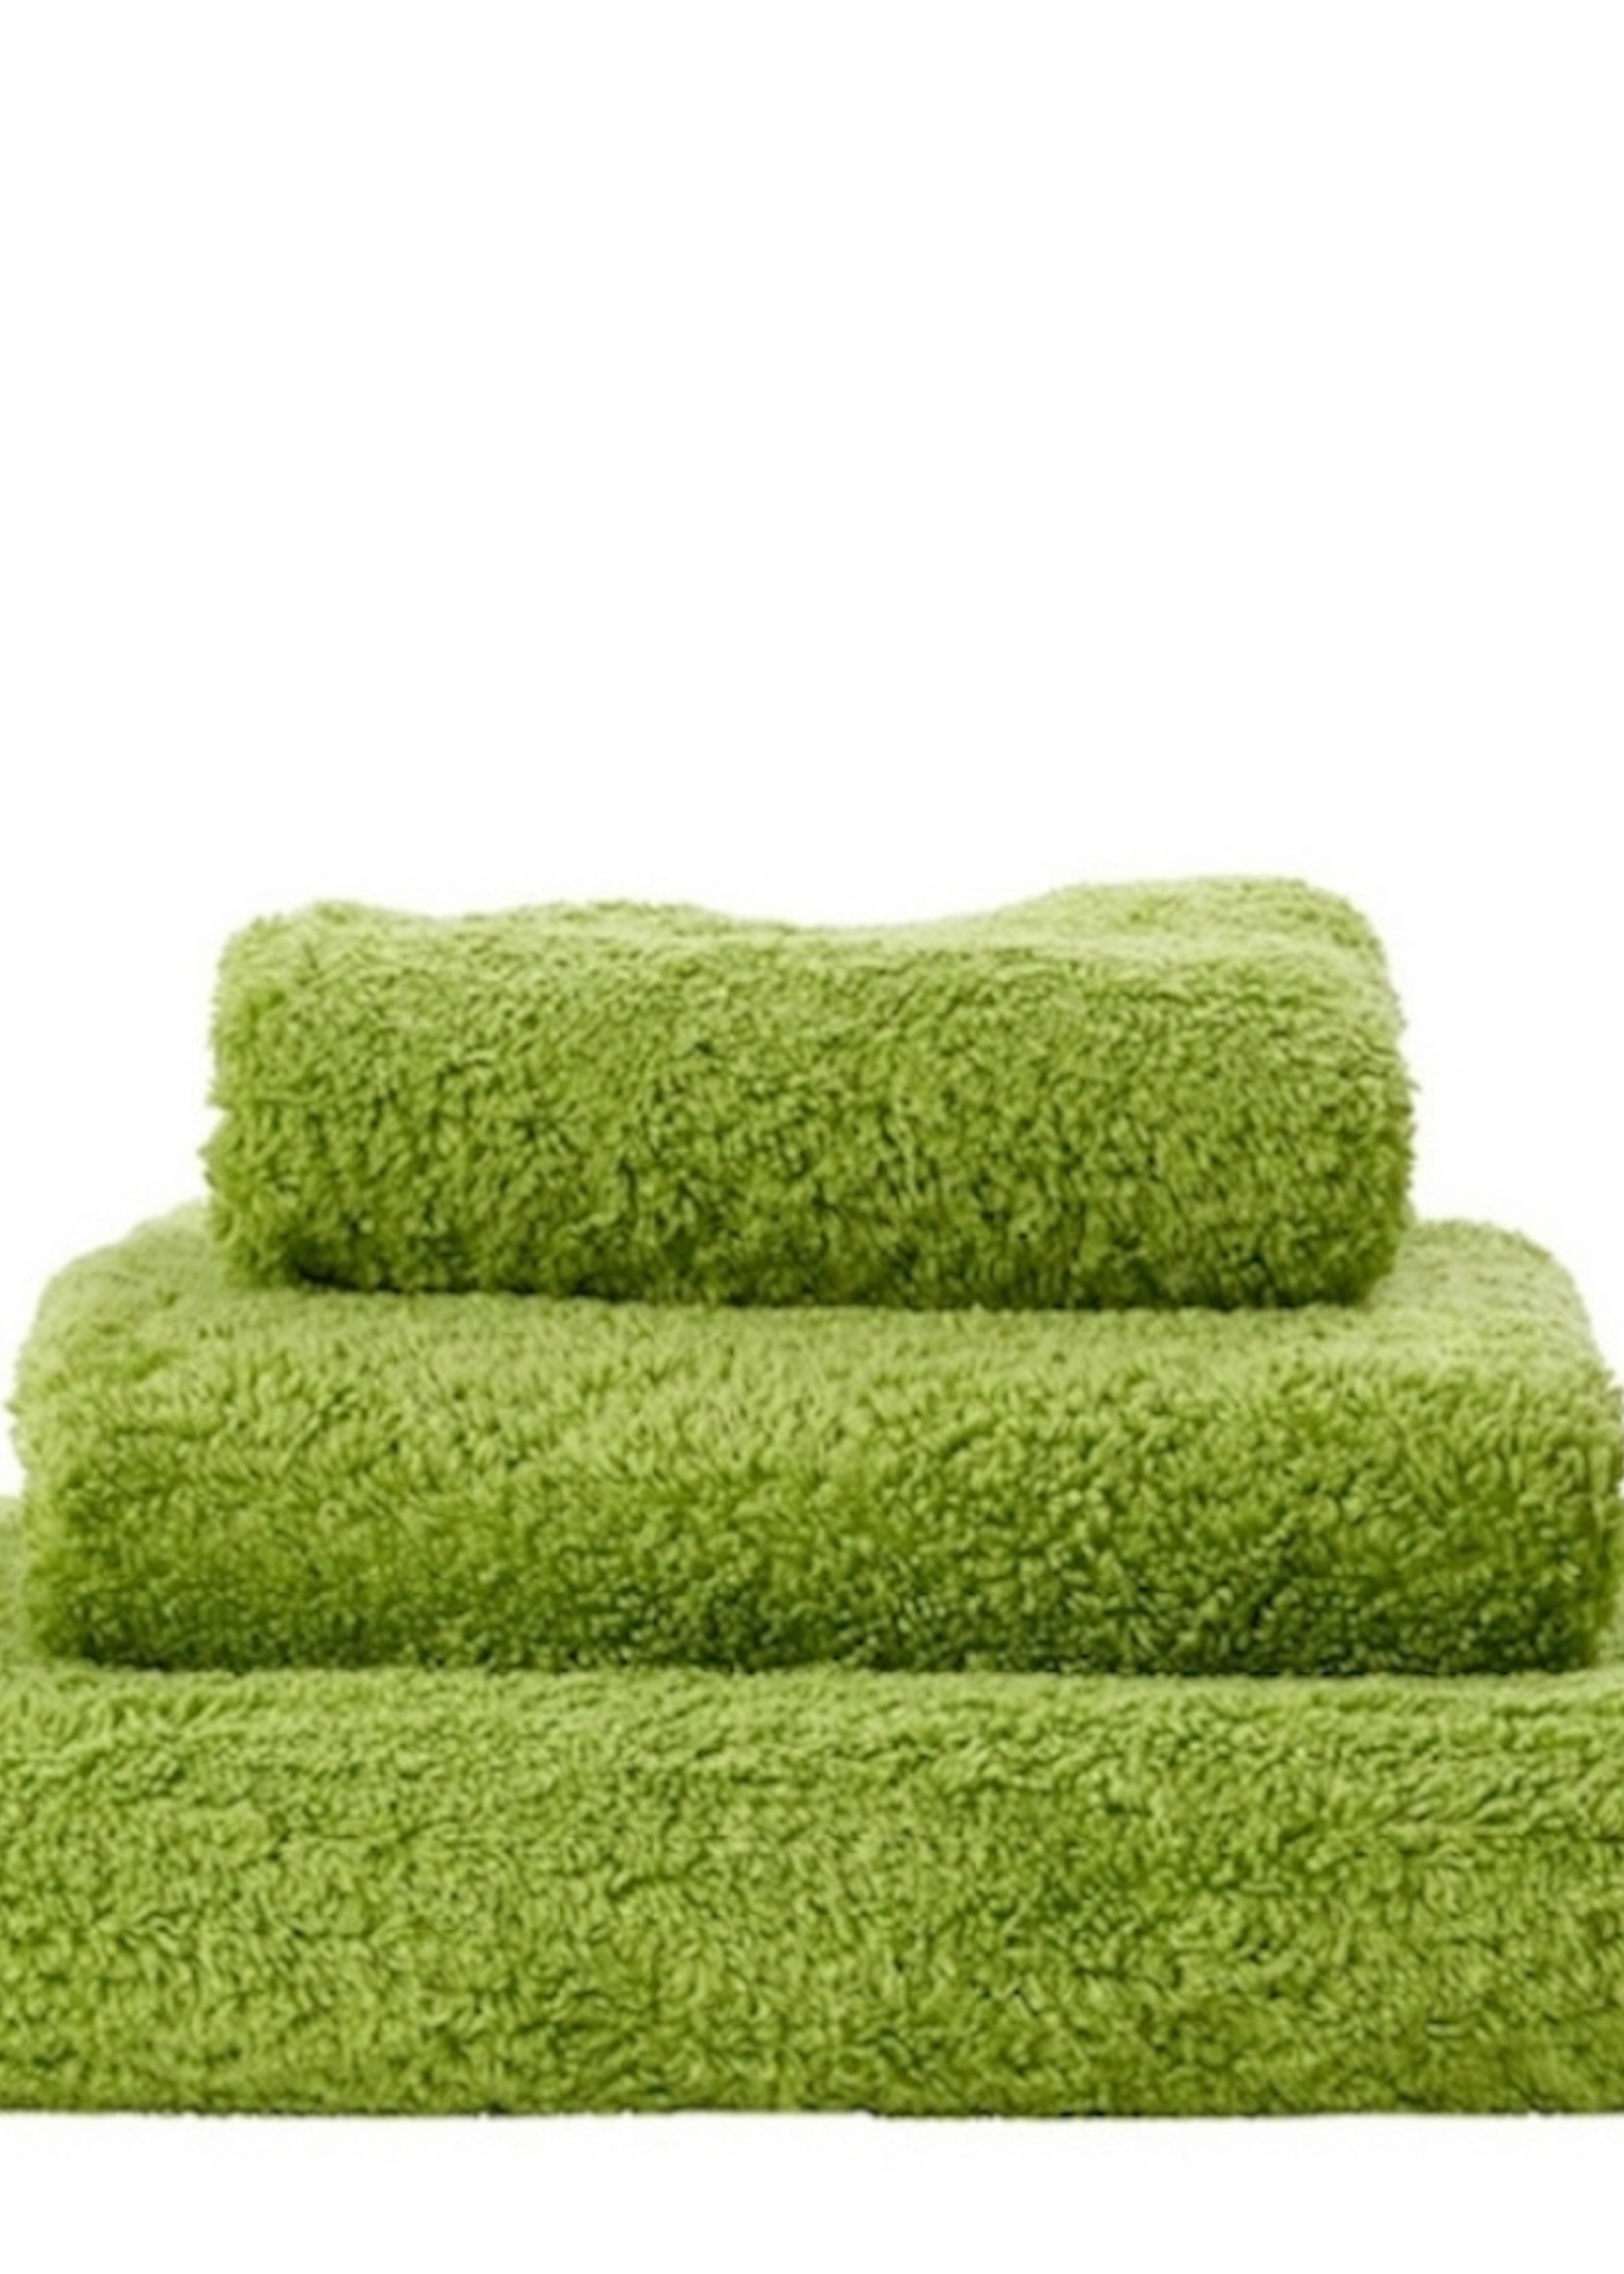 Abyss & Habidecor Super Pile Apple Green Towels